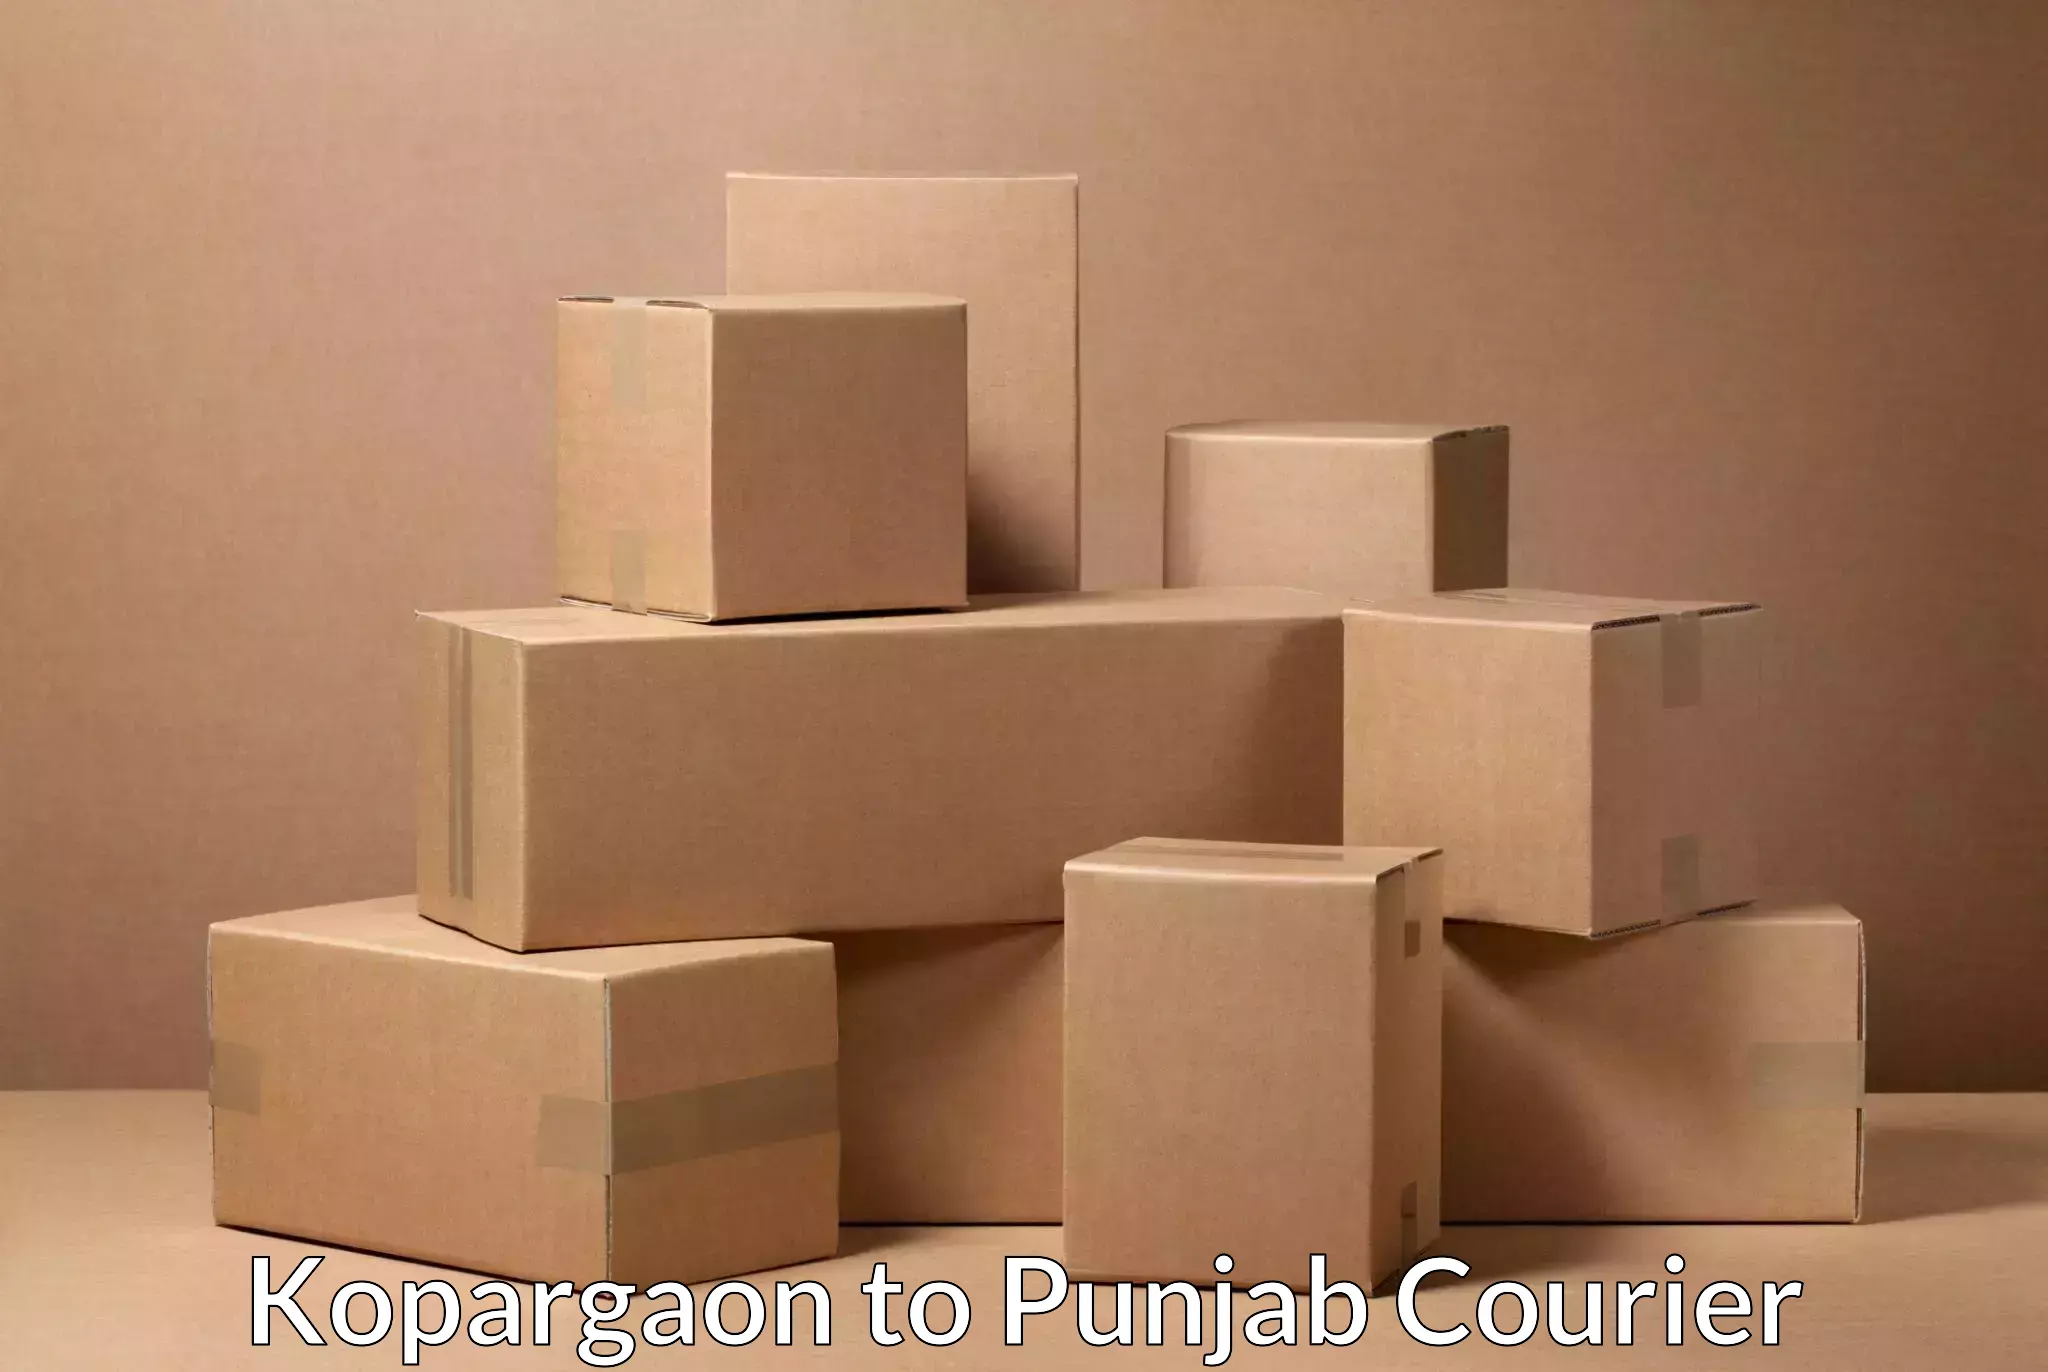 Next-day delivery options Kopargaon to Pathankot